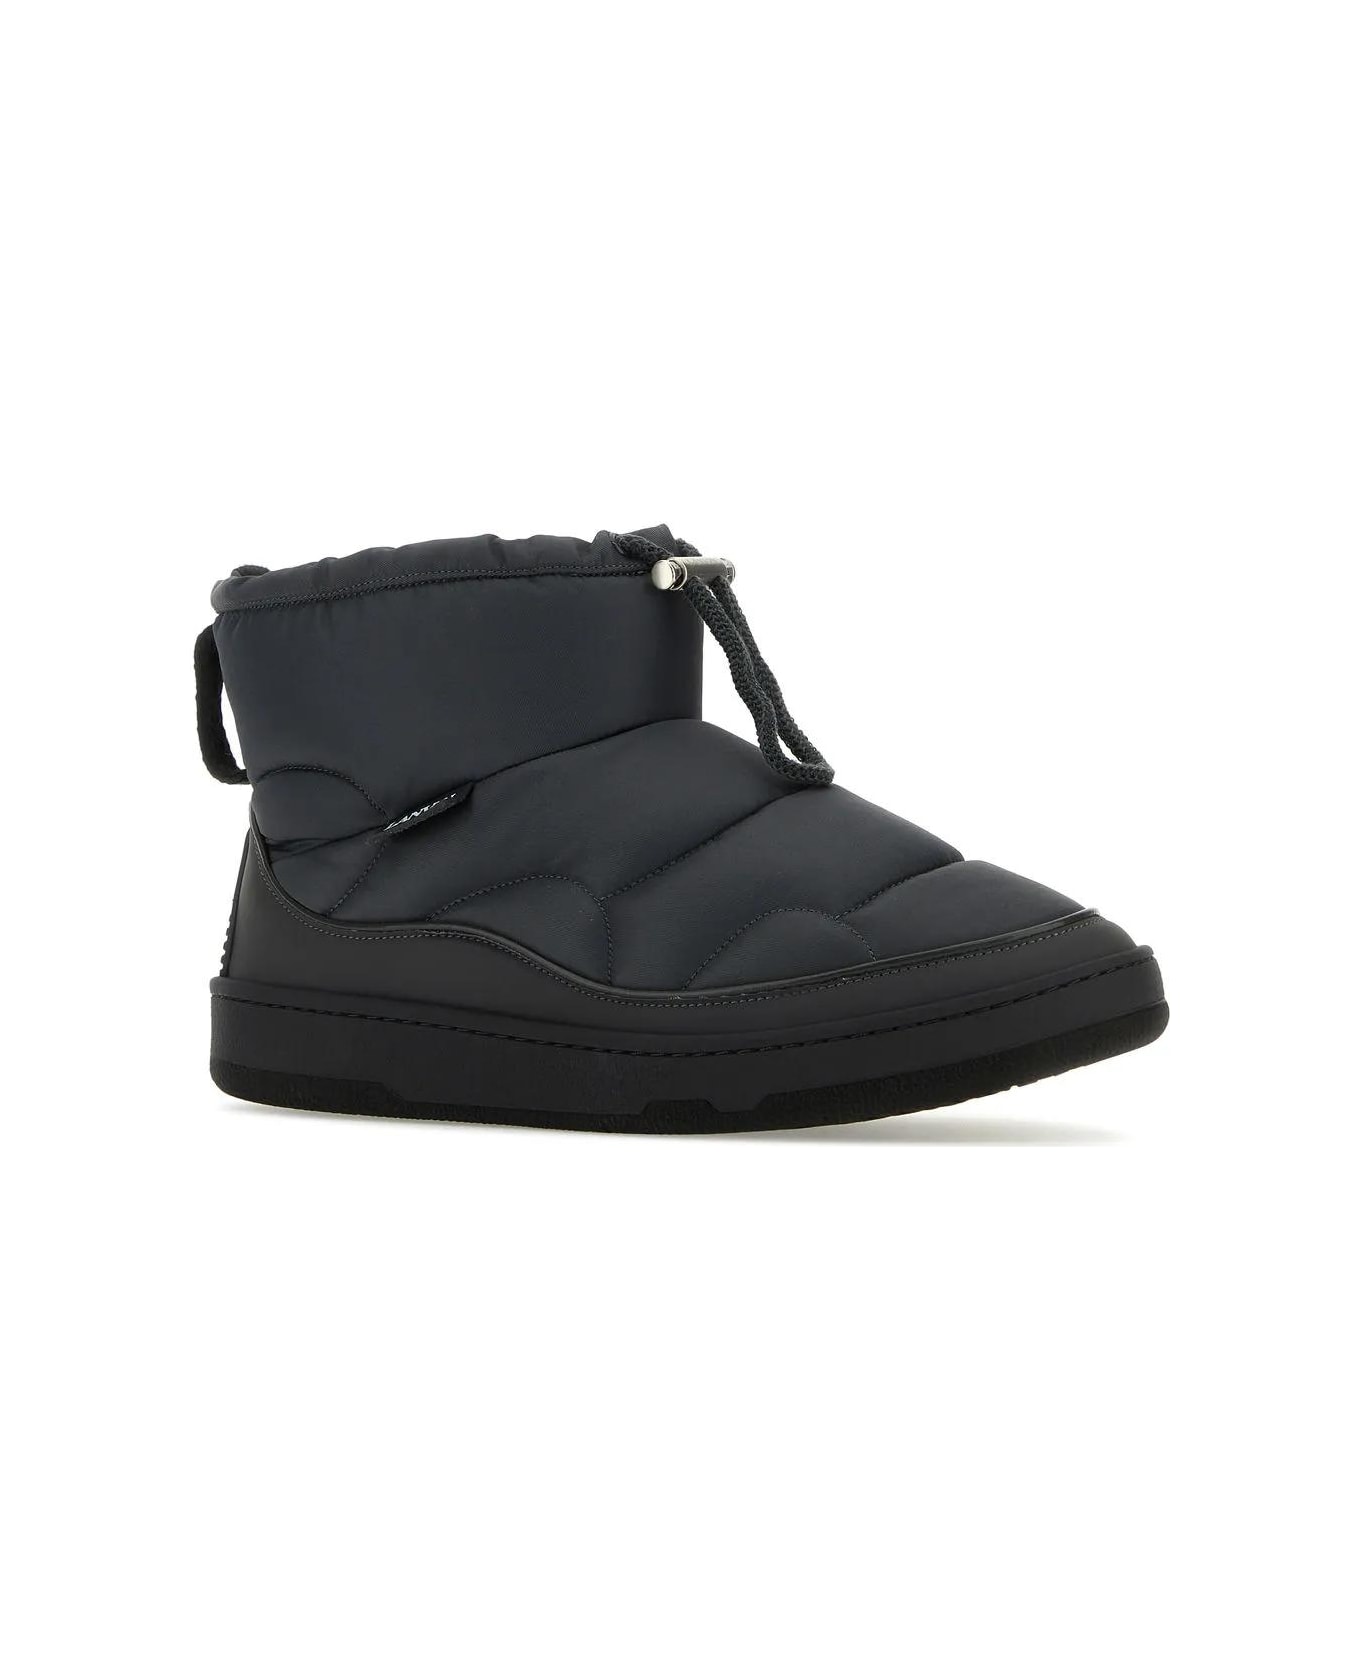 Lanvin Graphite Fabric Curb Snow Ankle Boots - LODEN